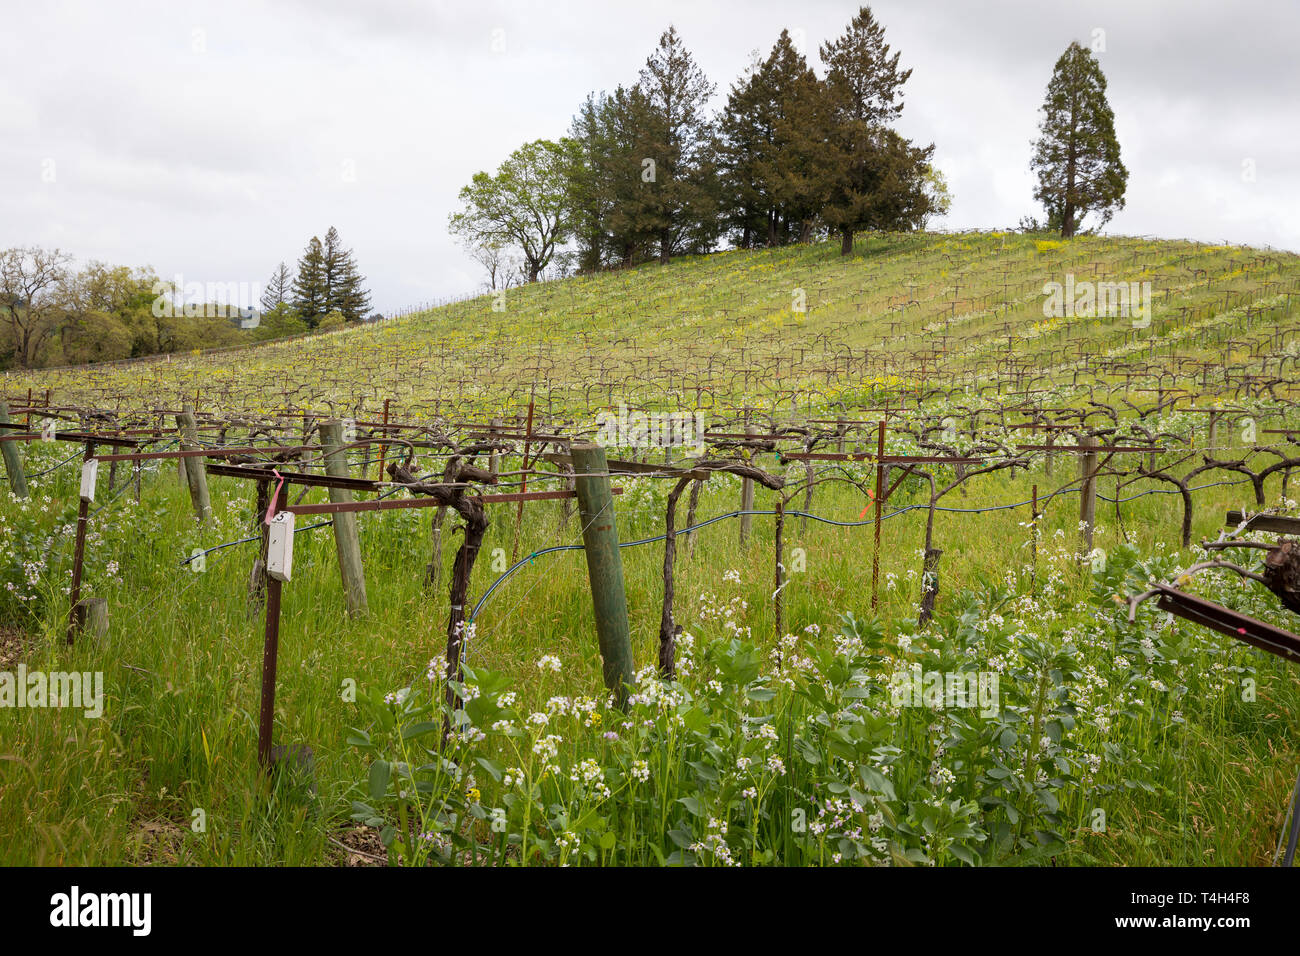 Winery in Sonoma Valley California During Spring Stock Photo